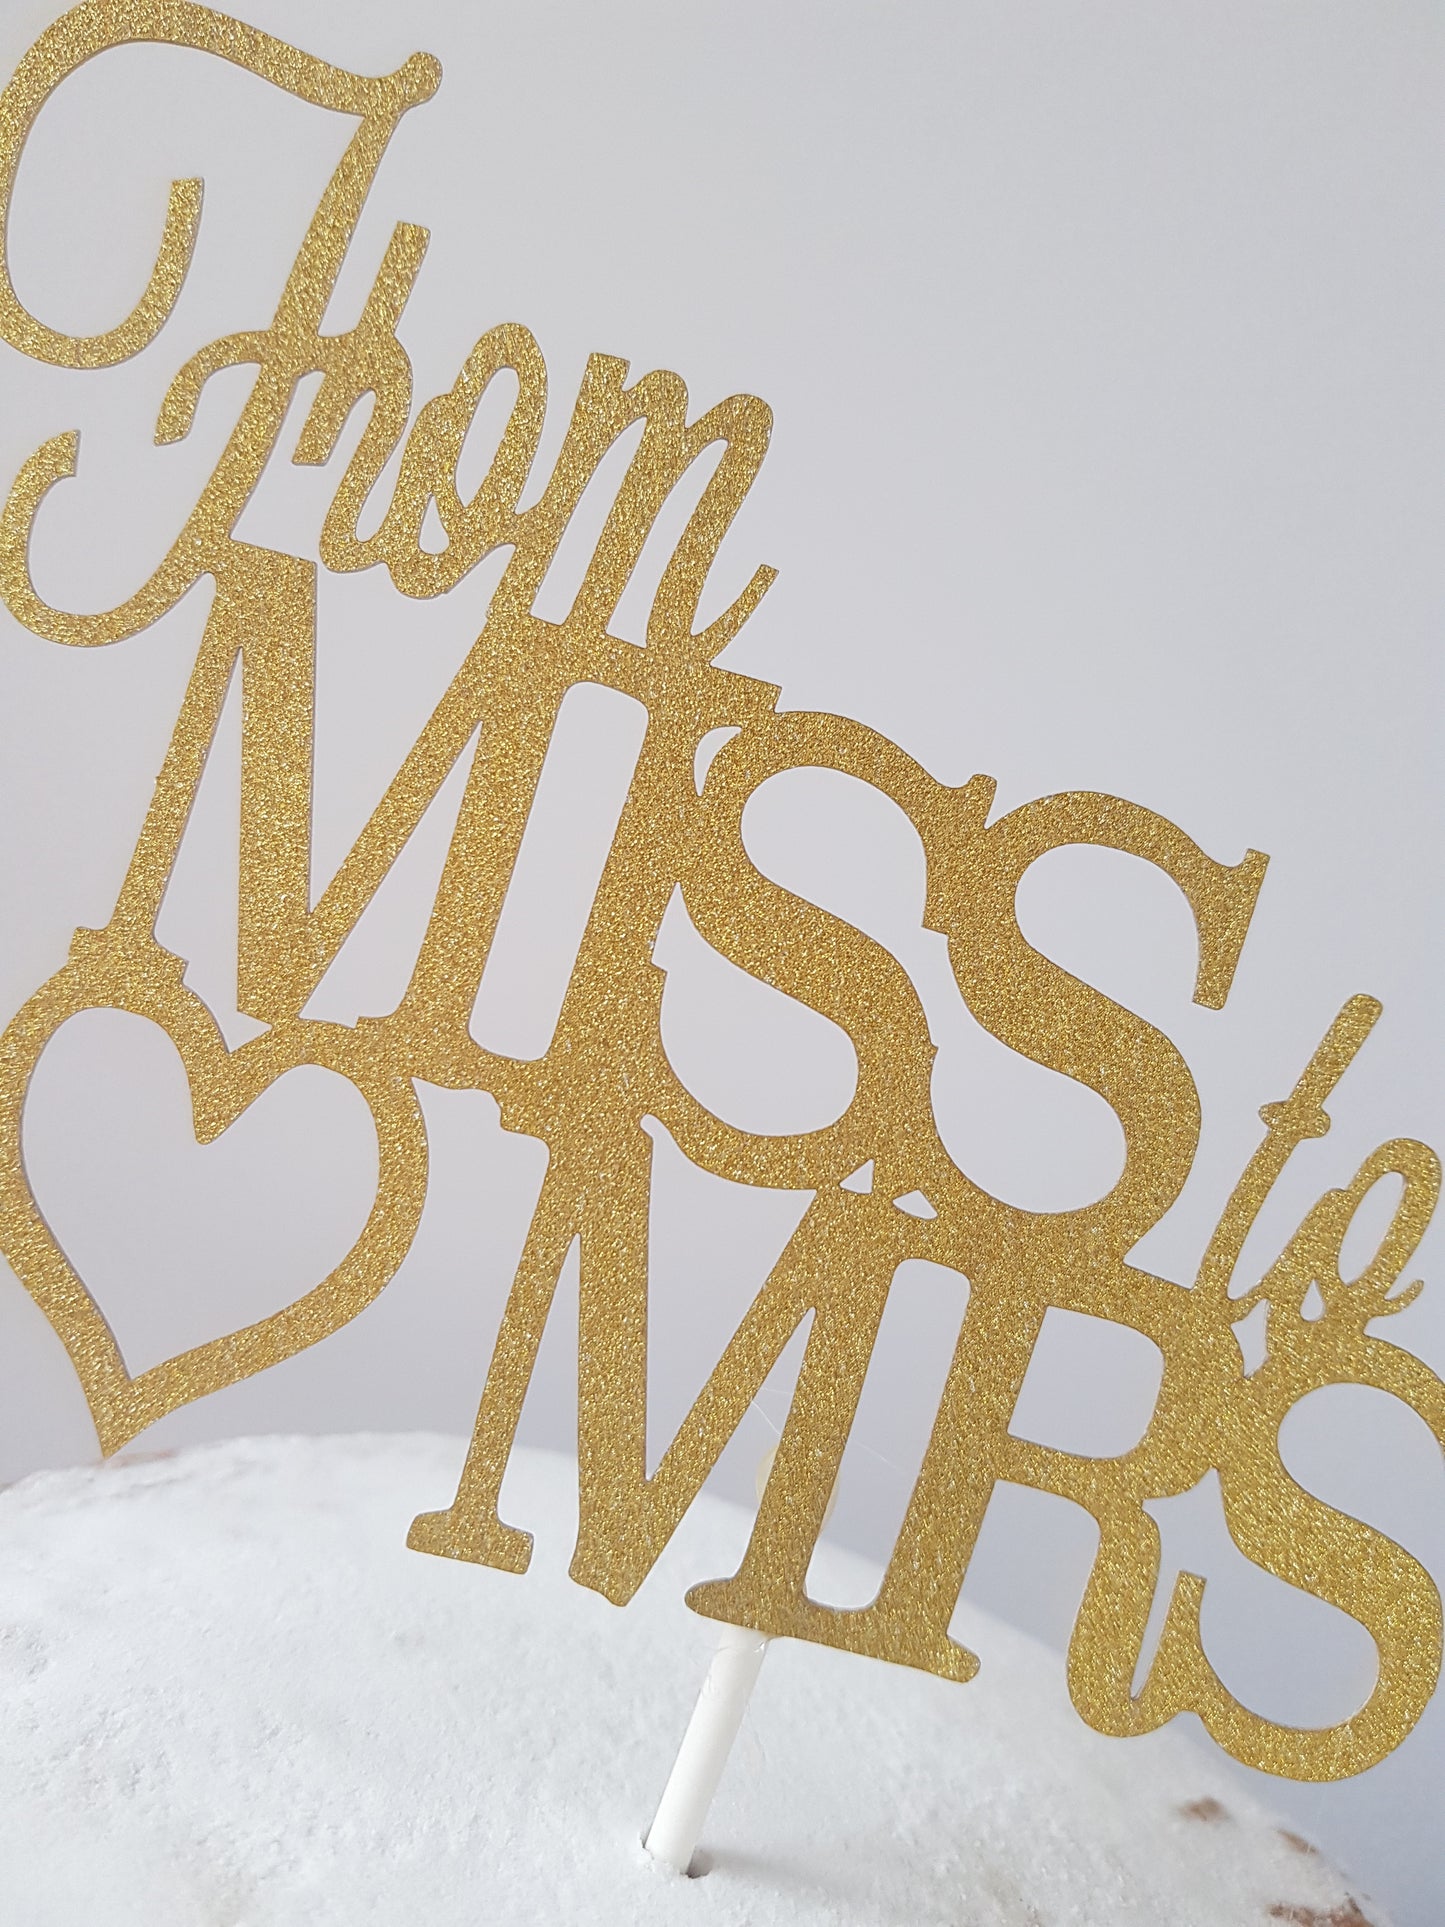 From Miss to Mrs gold sparkle cake topper